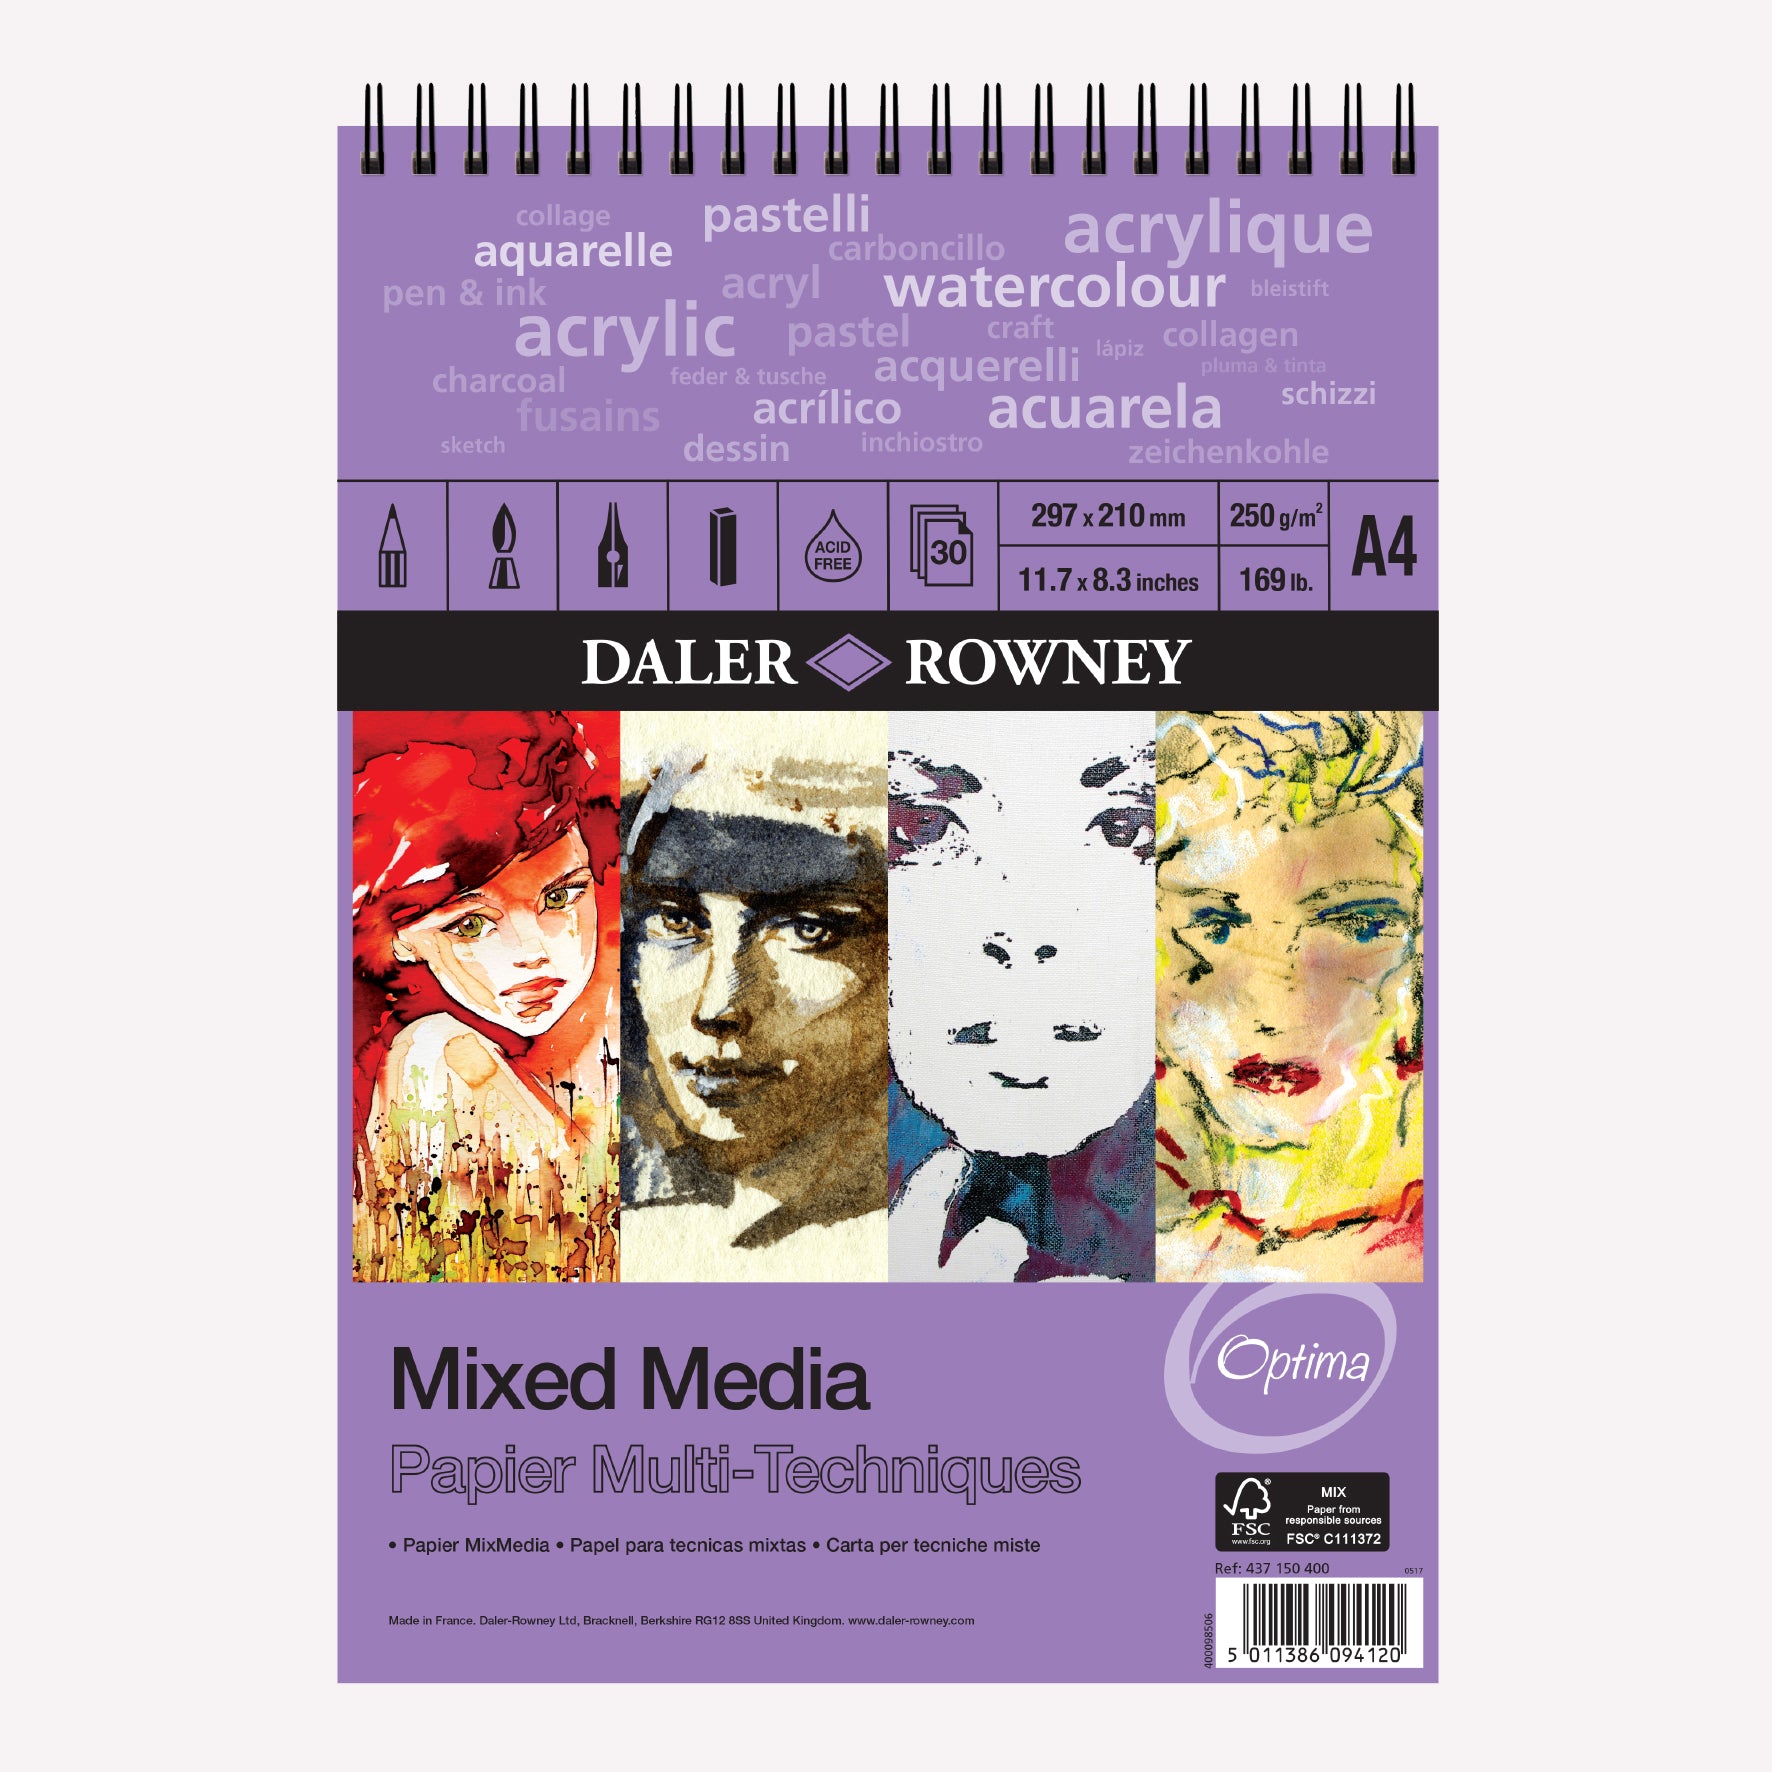 Daler-Rowney A4 Optima Mixed Media pad featuring a sturdy purple cover illustrated with portraits in different styles, and black spiral binding. 